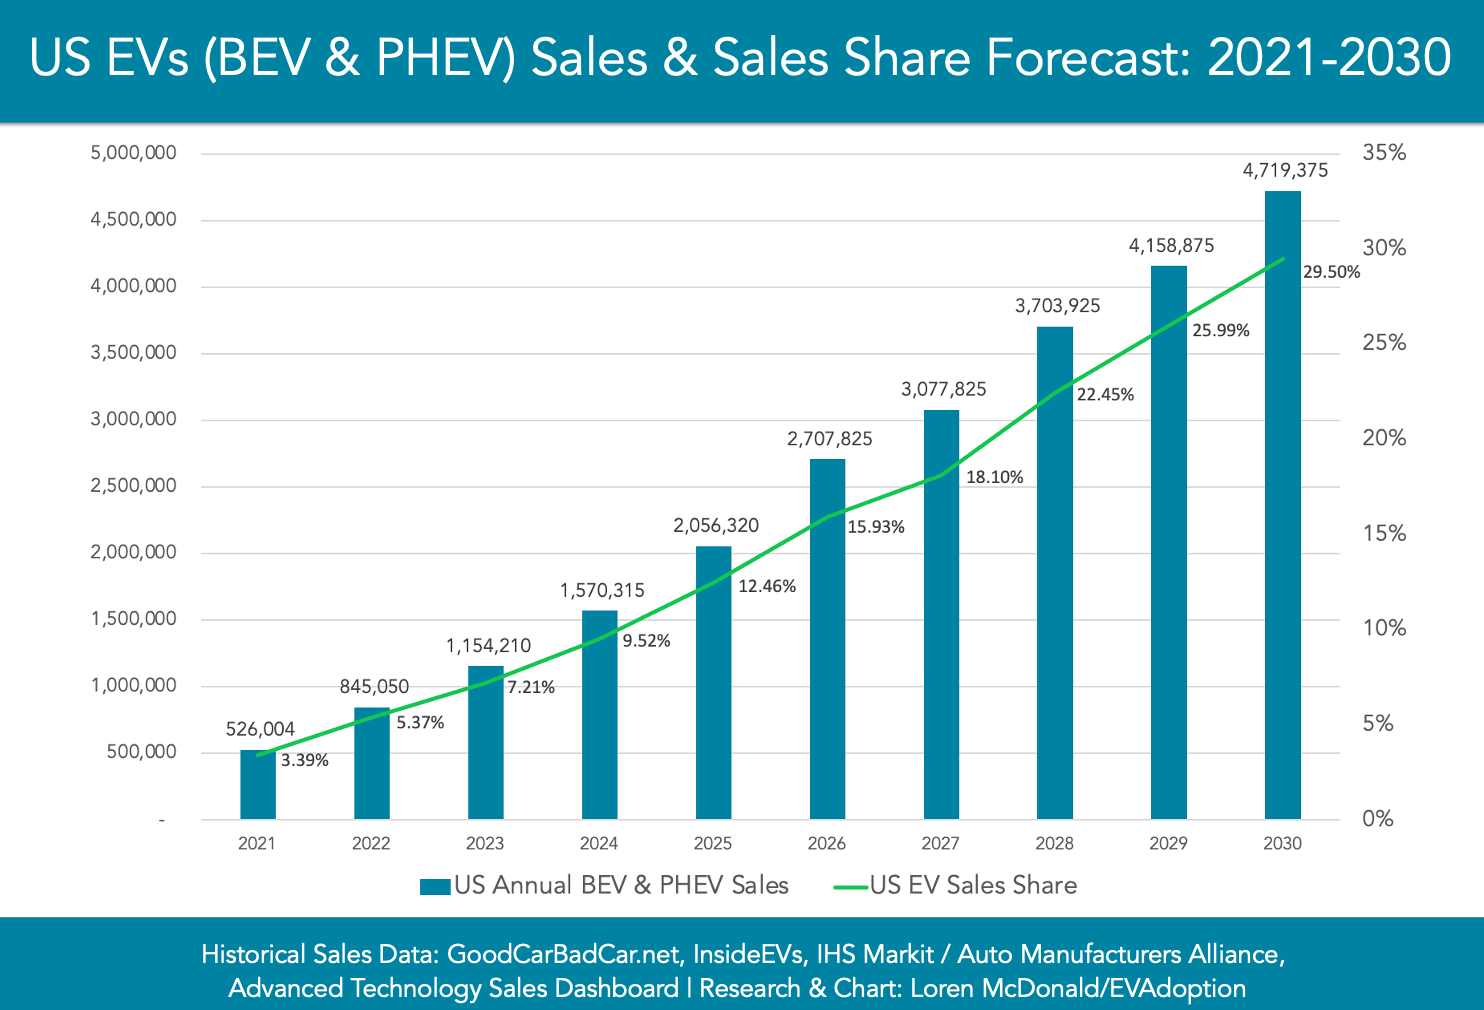 Graph of US EVs sales and sales share forecast from 2021 to 2030